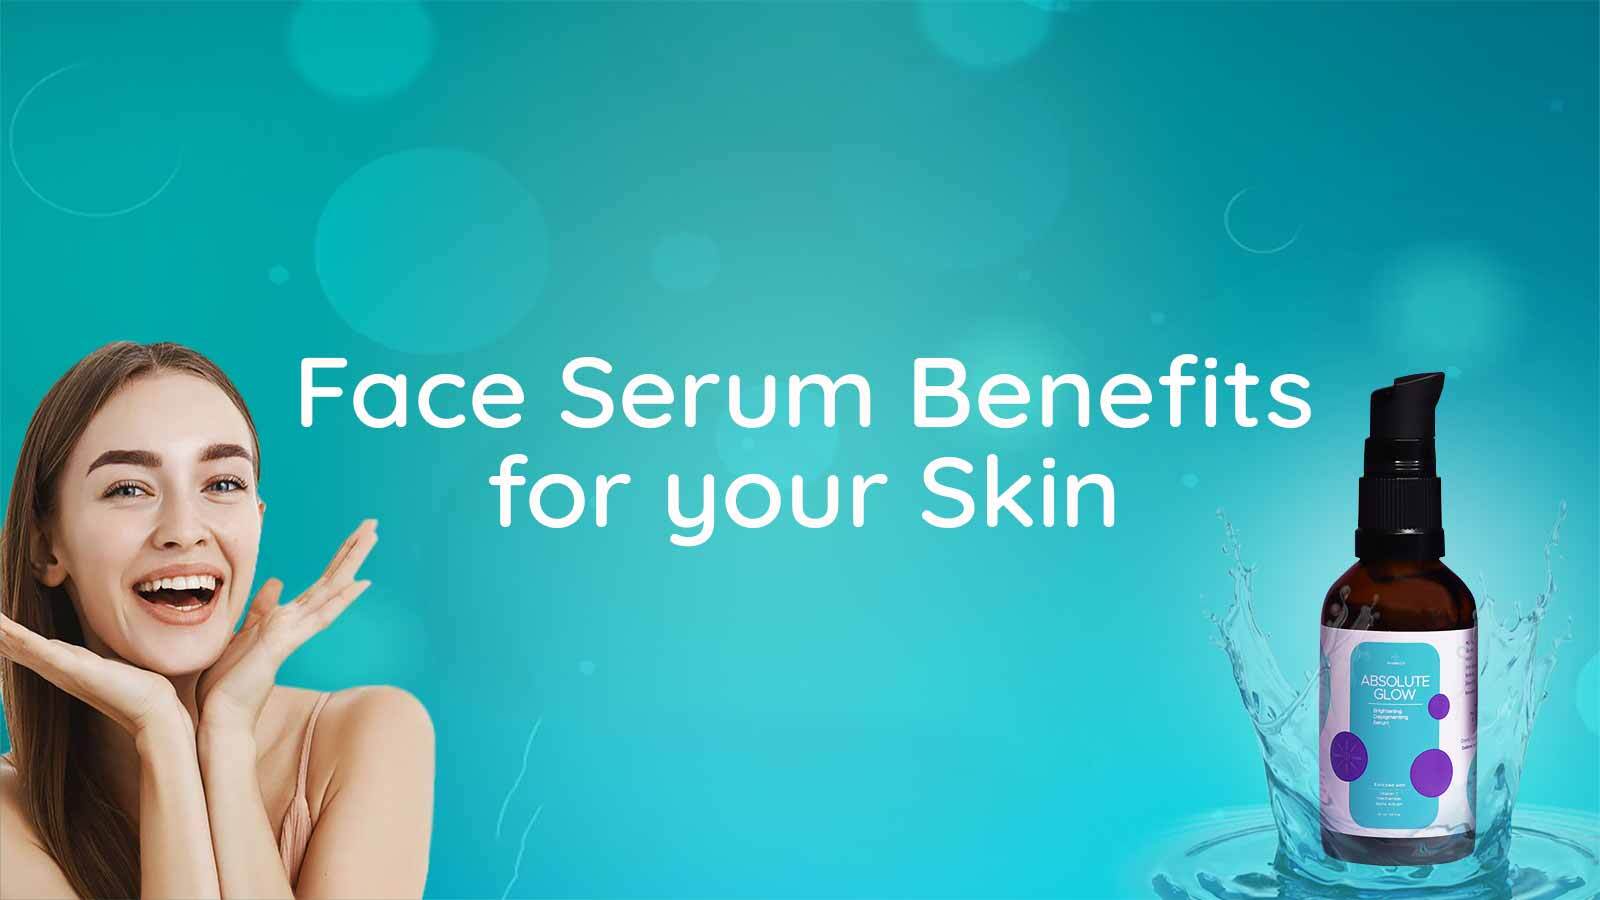 Face Serum Benefits for your Skin!